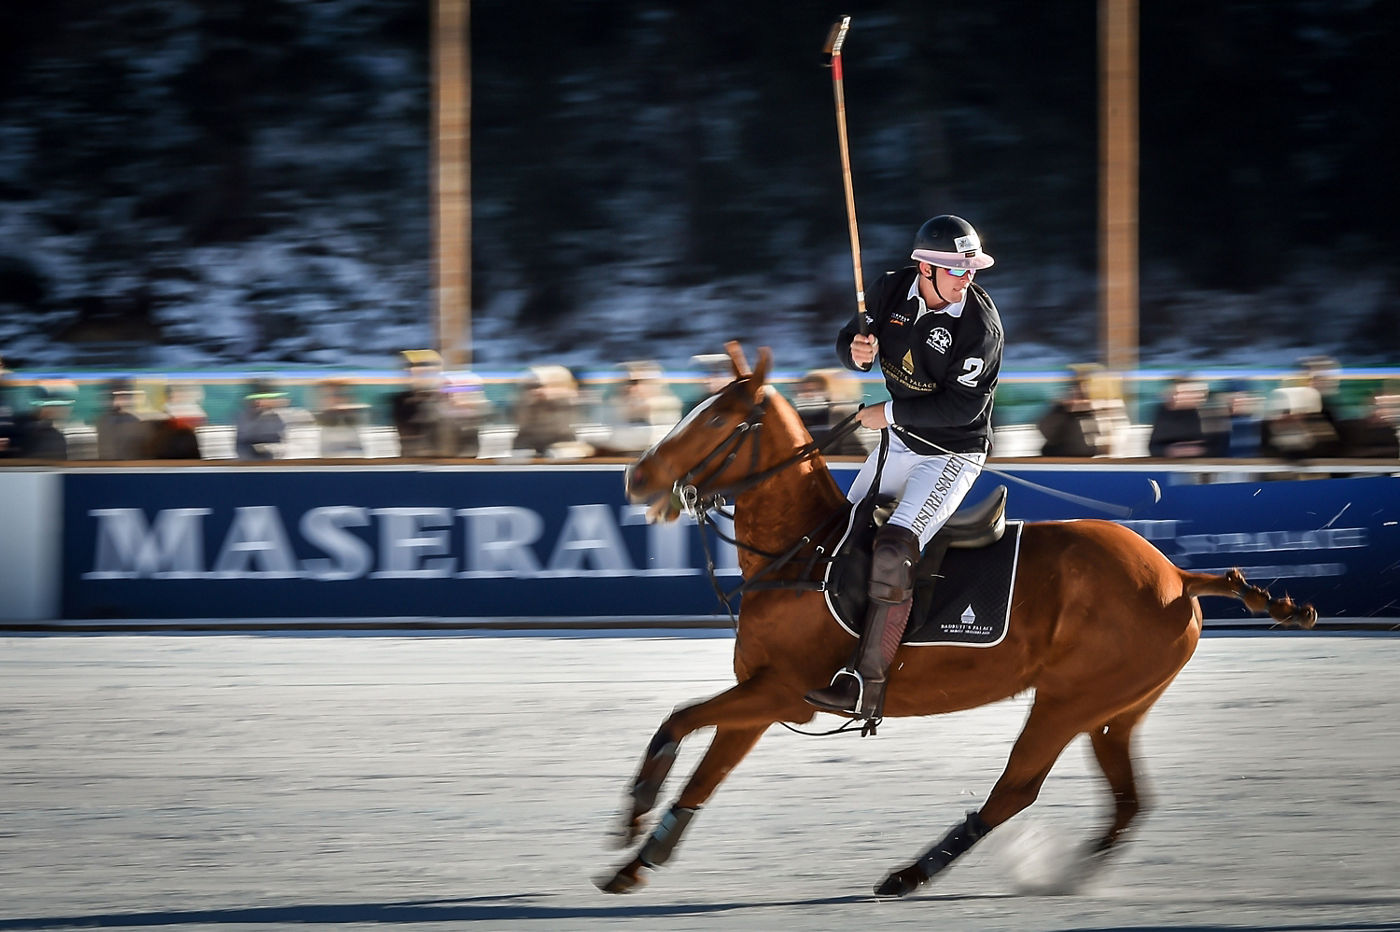 Snow Polo World Cup in St Moritz (Switzerland)